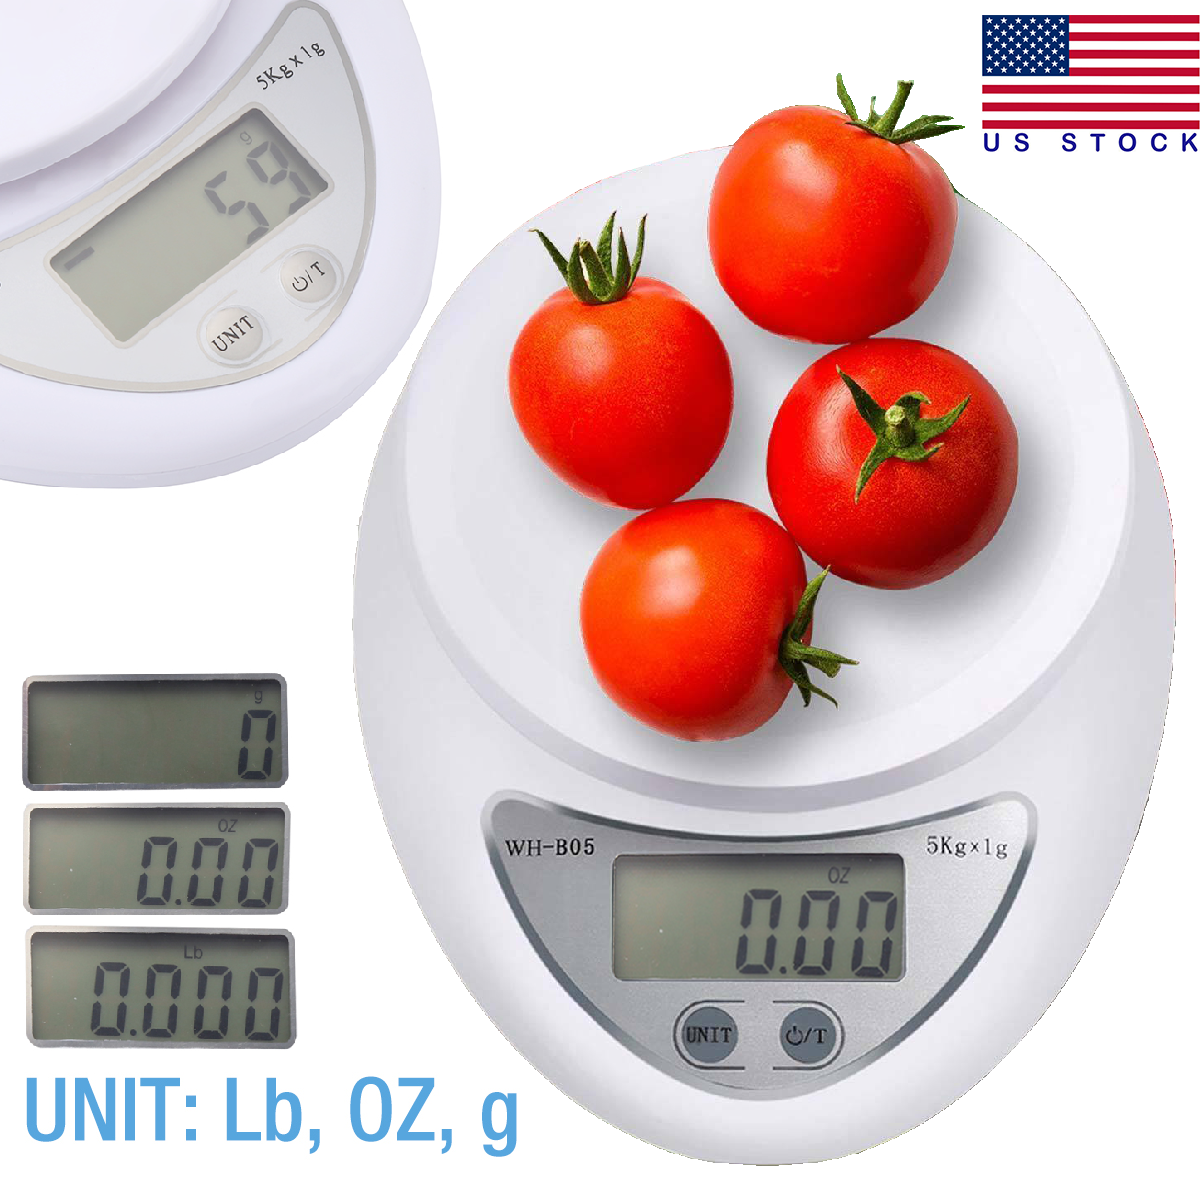 Digital Kitchen Food Cooking Scale Weight Balance In Pounds, Grams, Ounces,& Kg